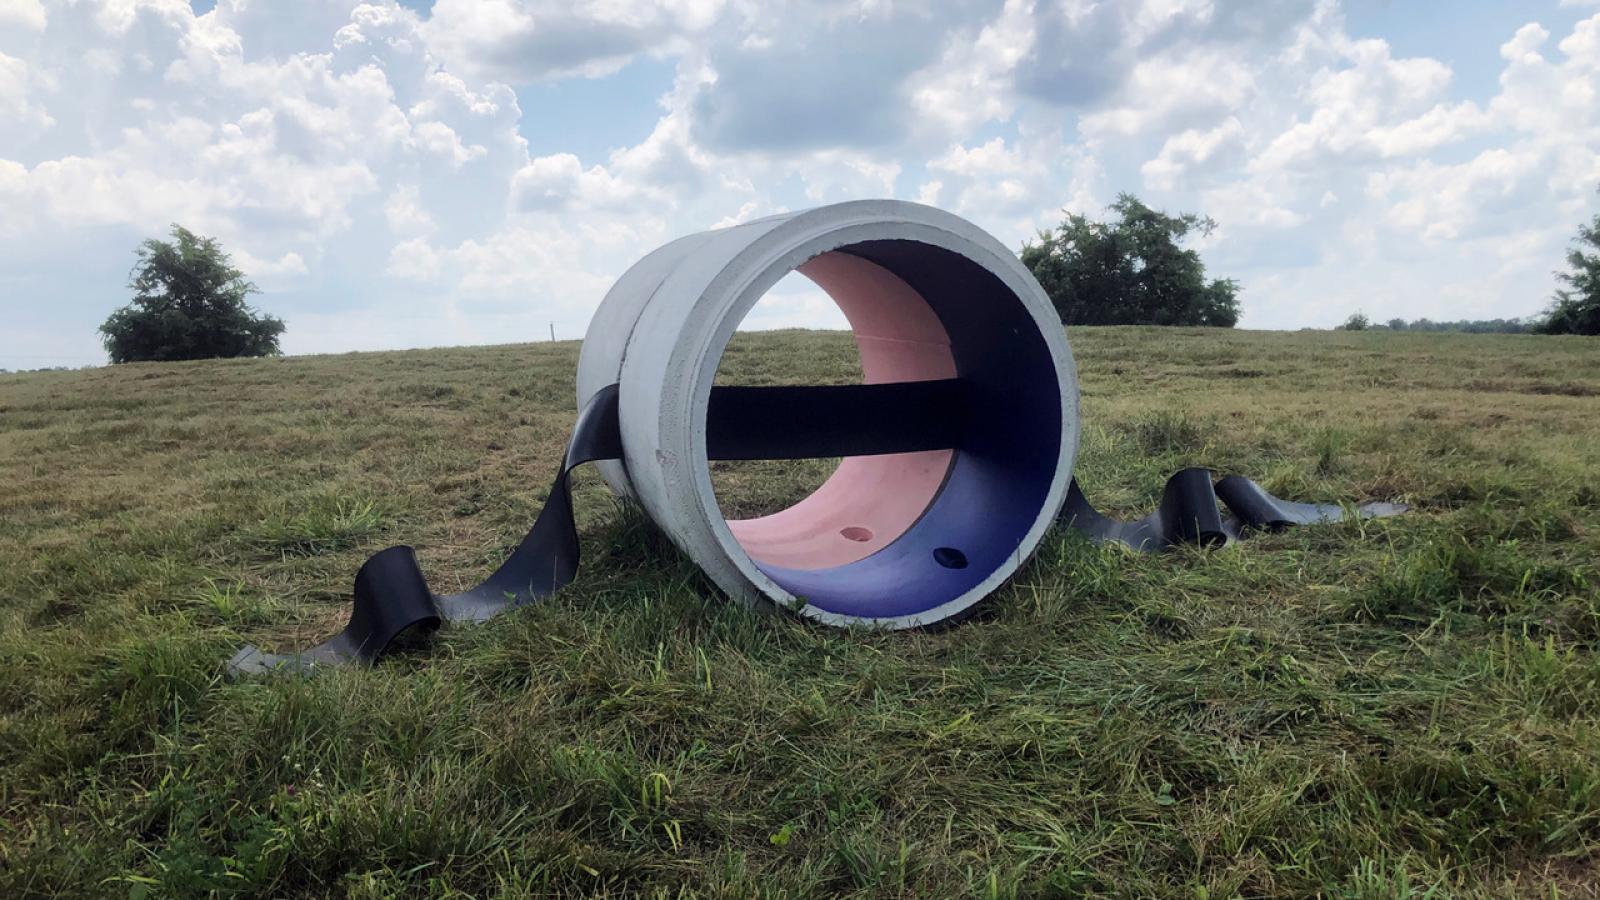 A barrel shaped sculpture with pink and purple interior sits in a grassy field